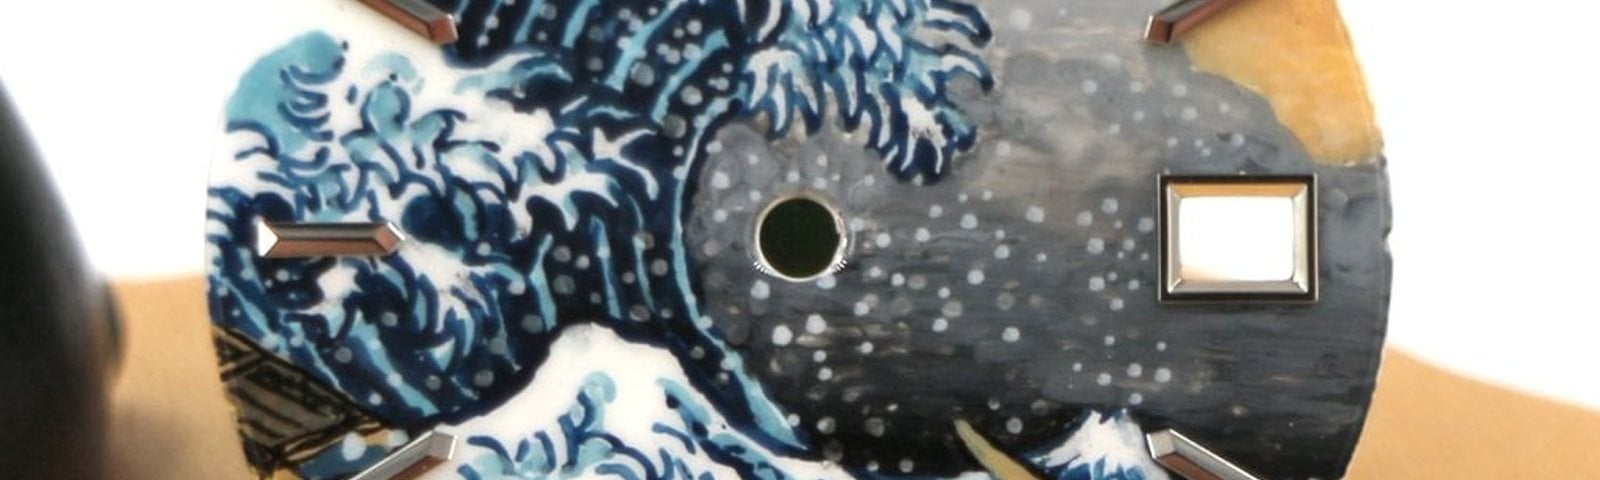 HALL OF FAME: The Owners of Hand Painted Great Wave off Kanagawa Dial